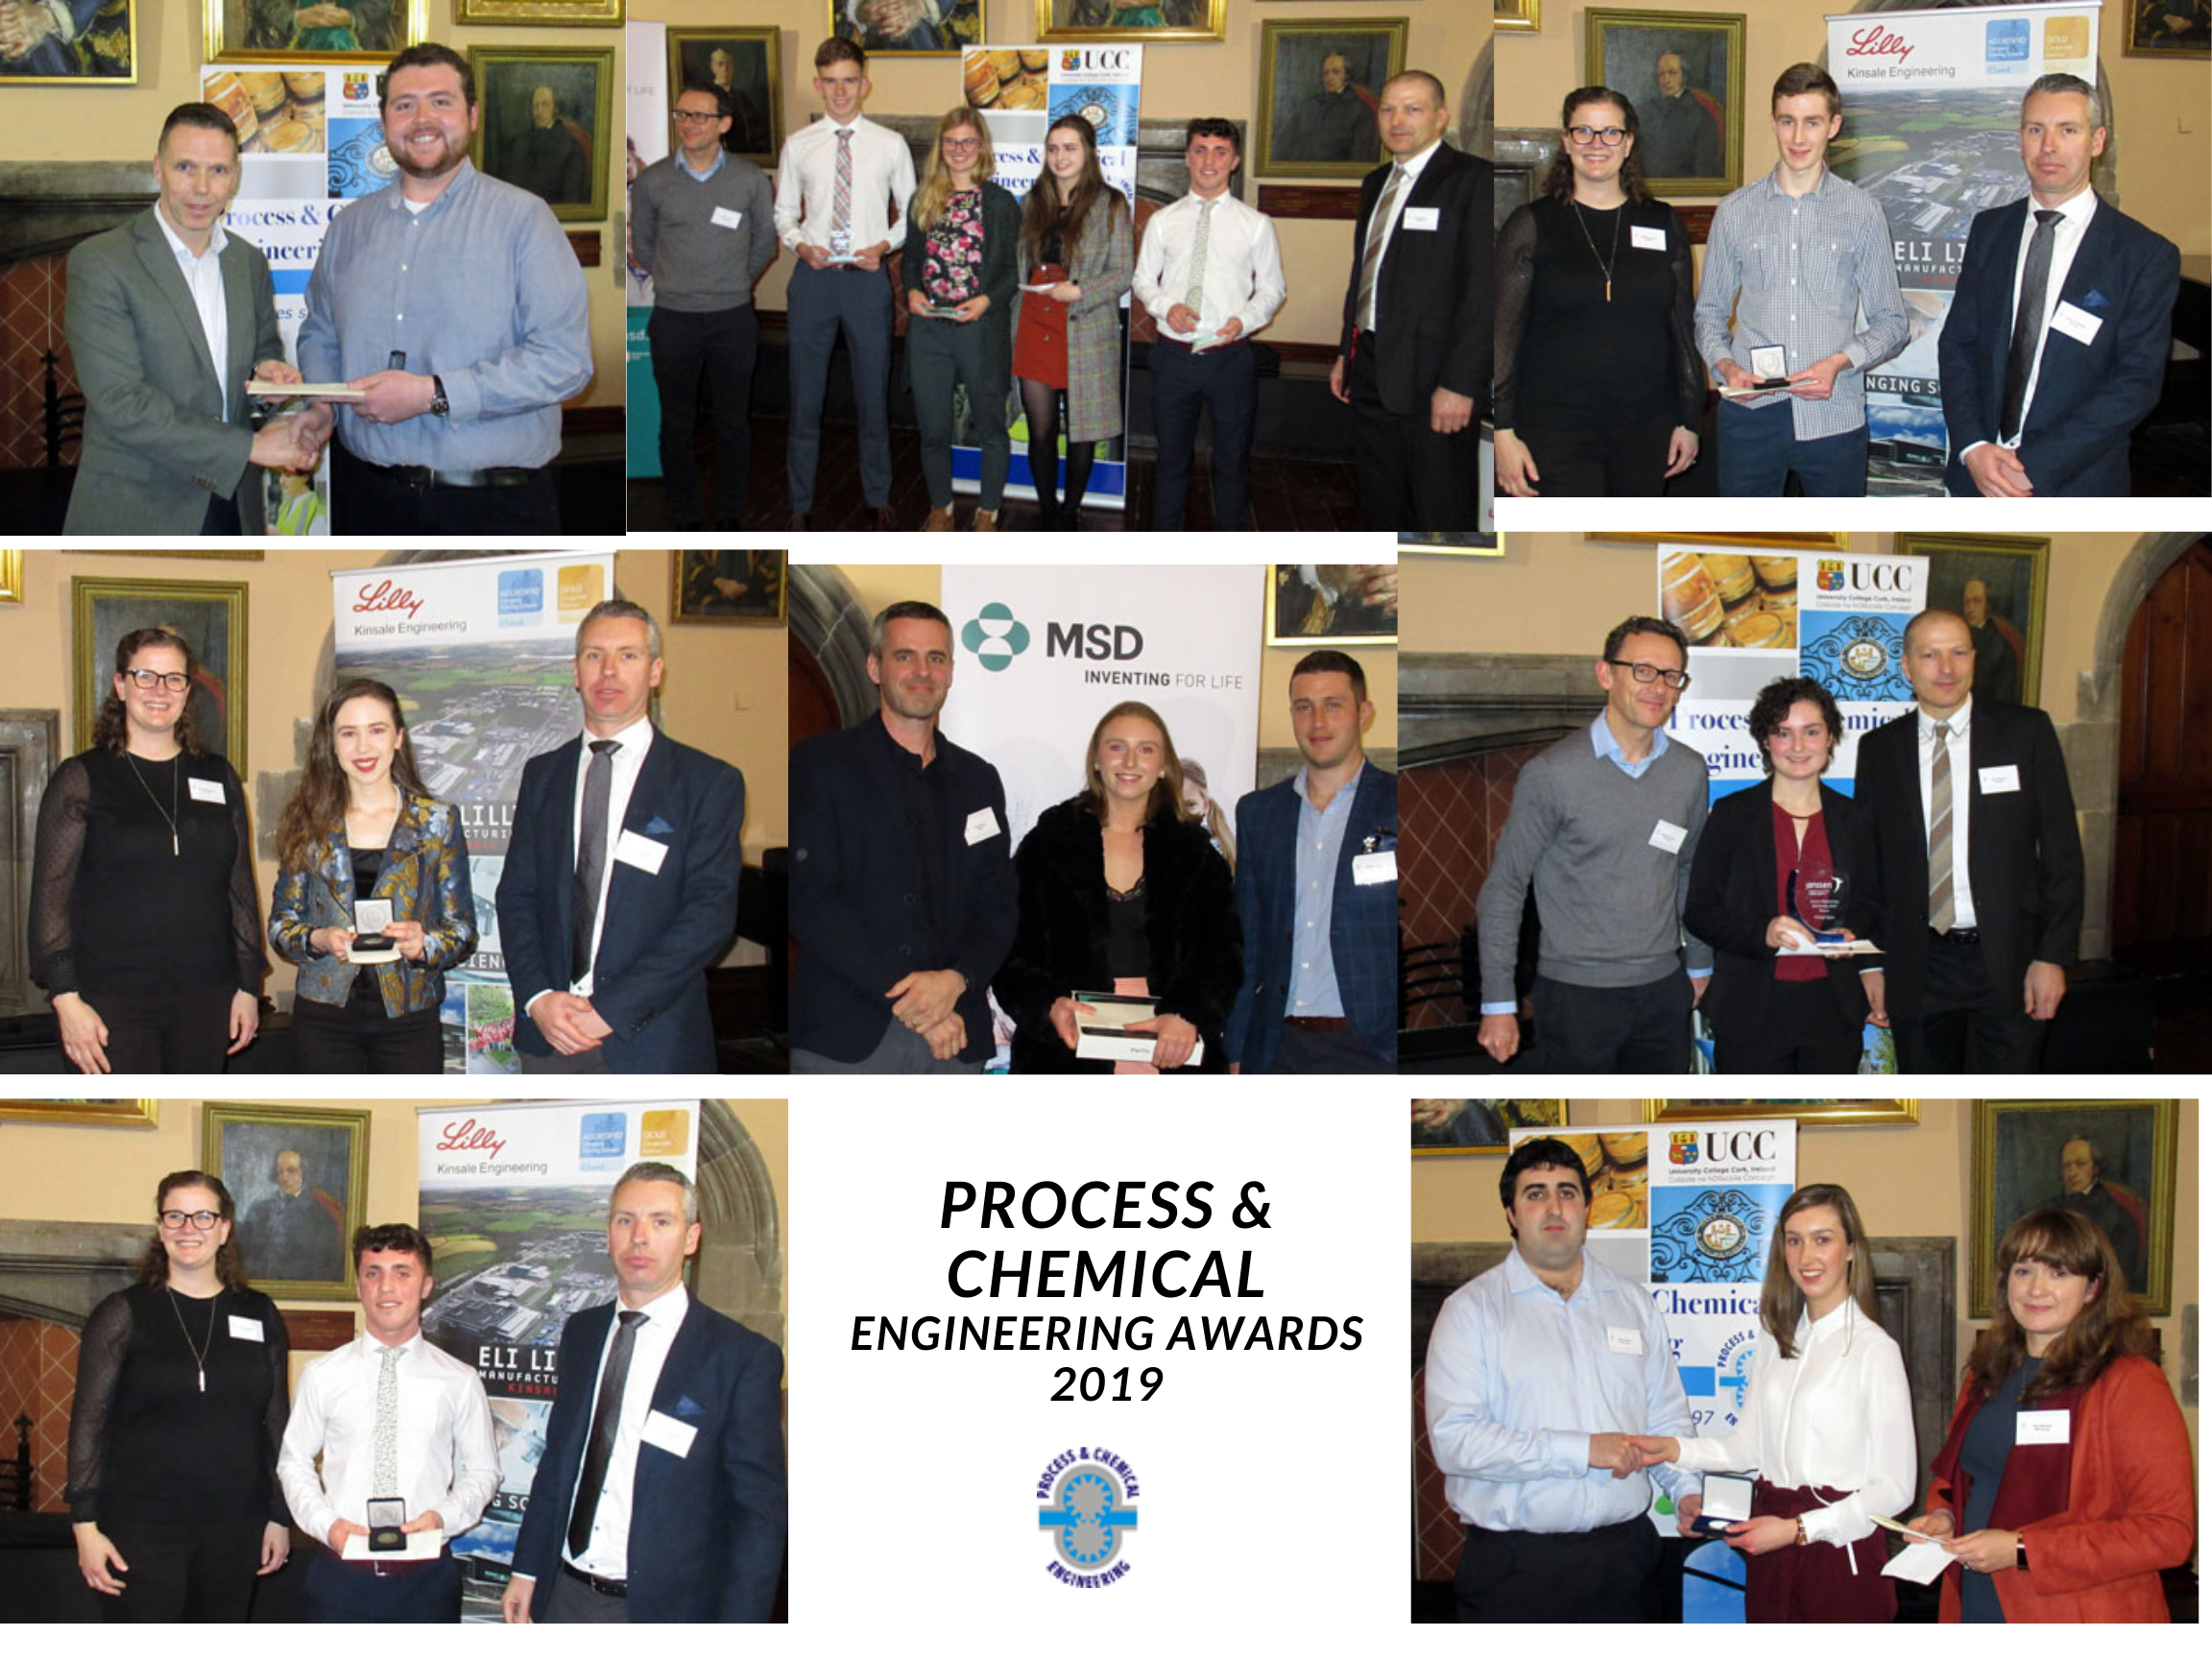 Process & Chemical Engineering Awards 2019